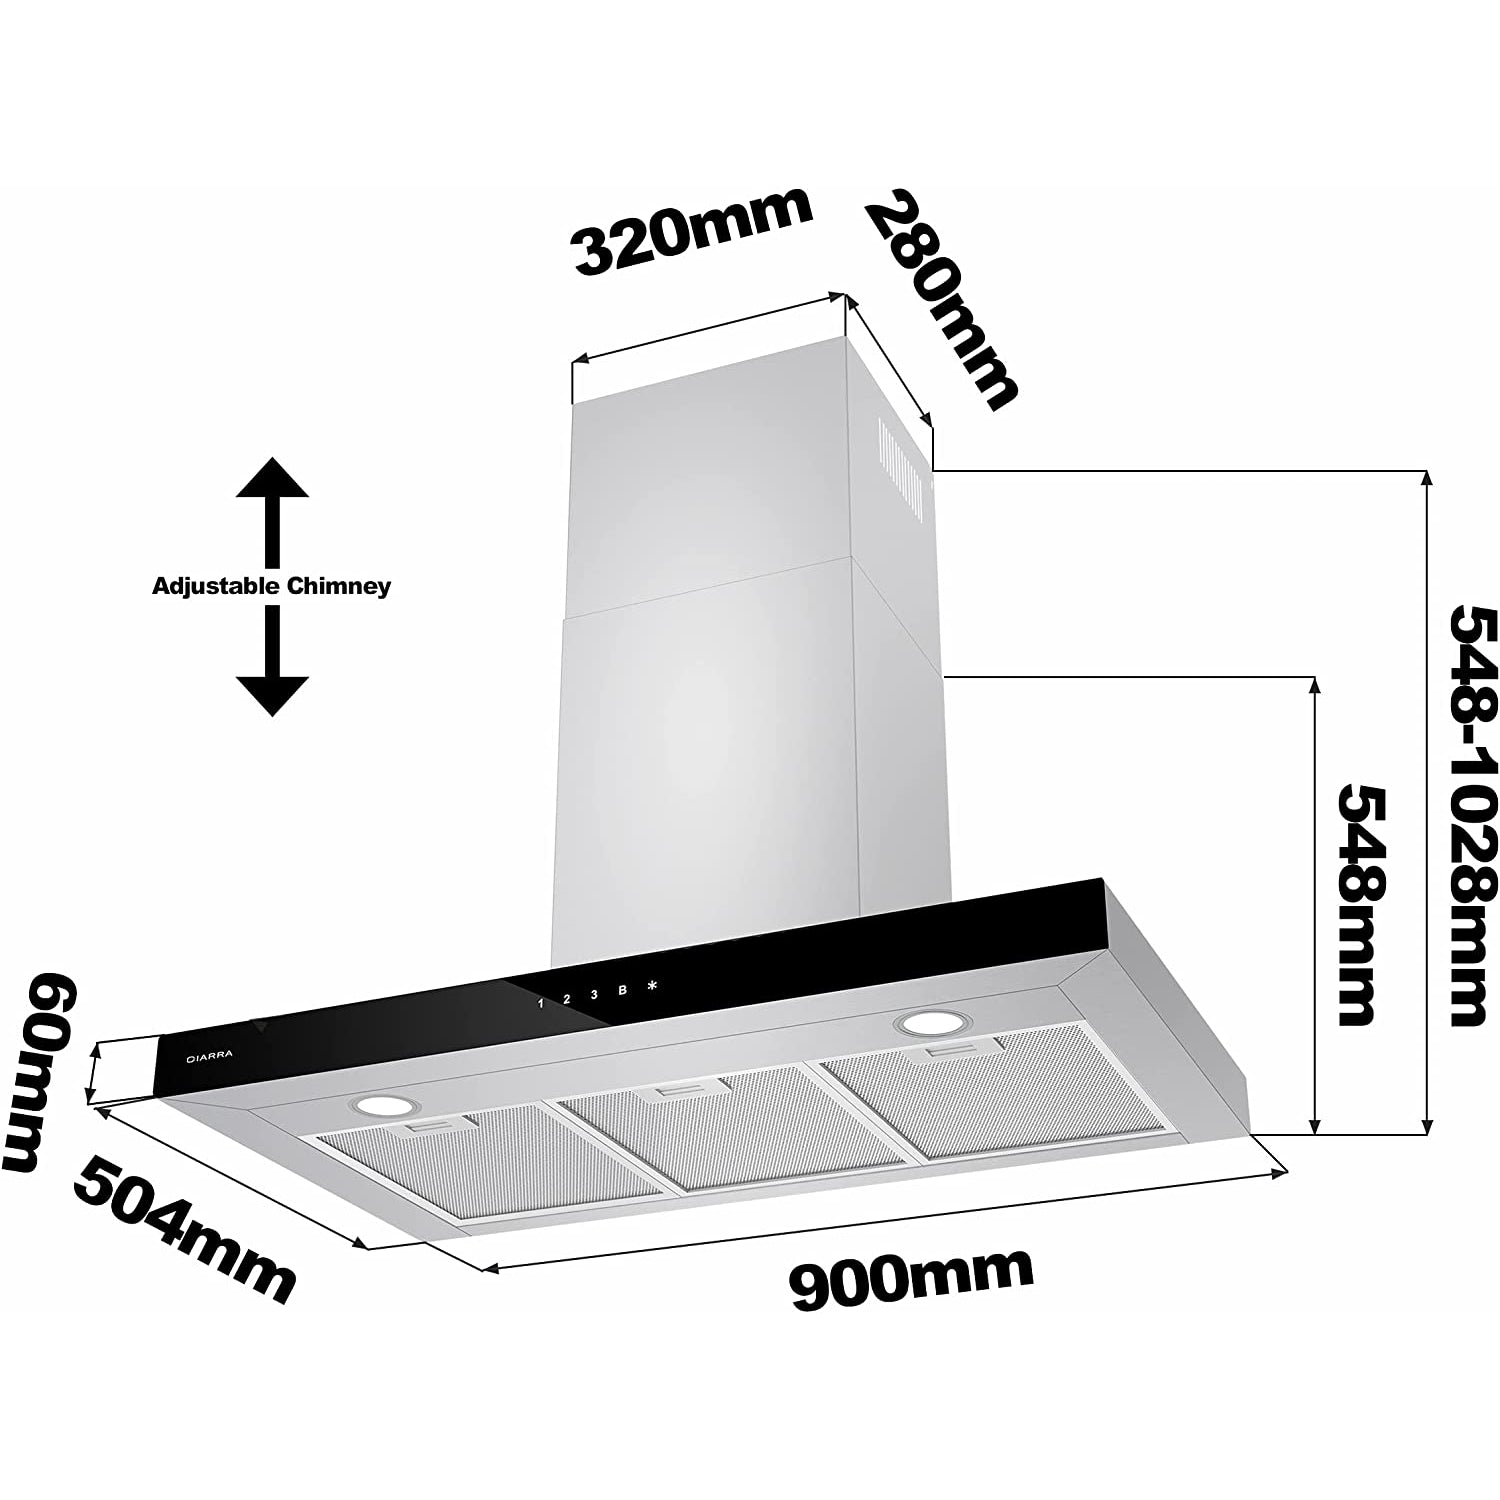 CIARRA CBCS9102 Class A++ Touch Control Chimney Wall Mount Stainless Steel Cooker Hood Extractor Fan